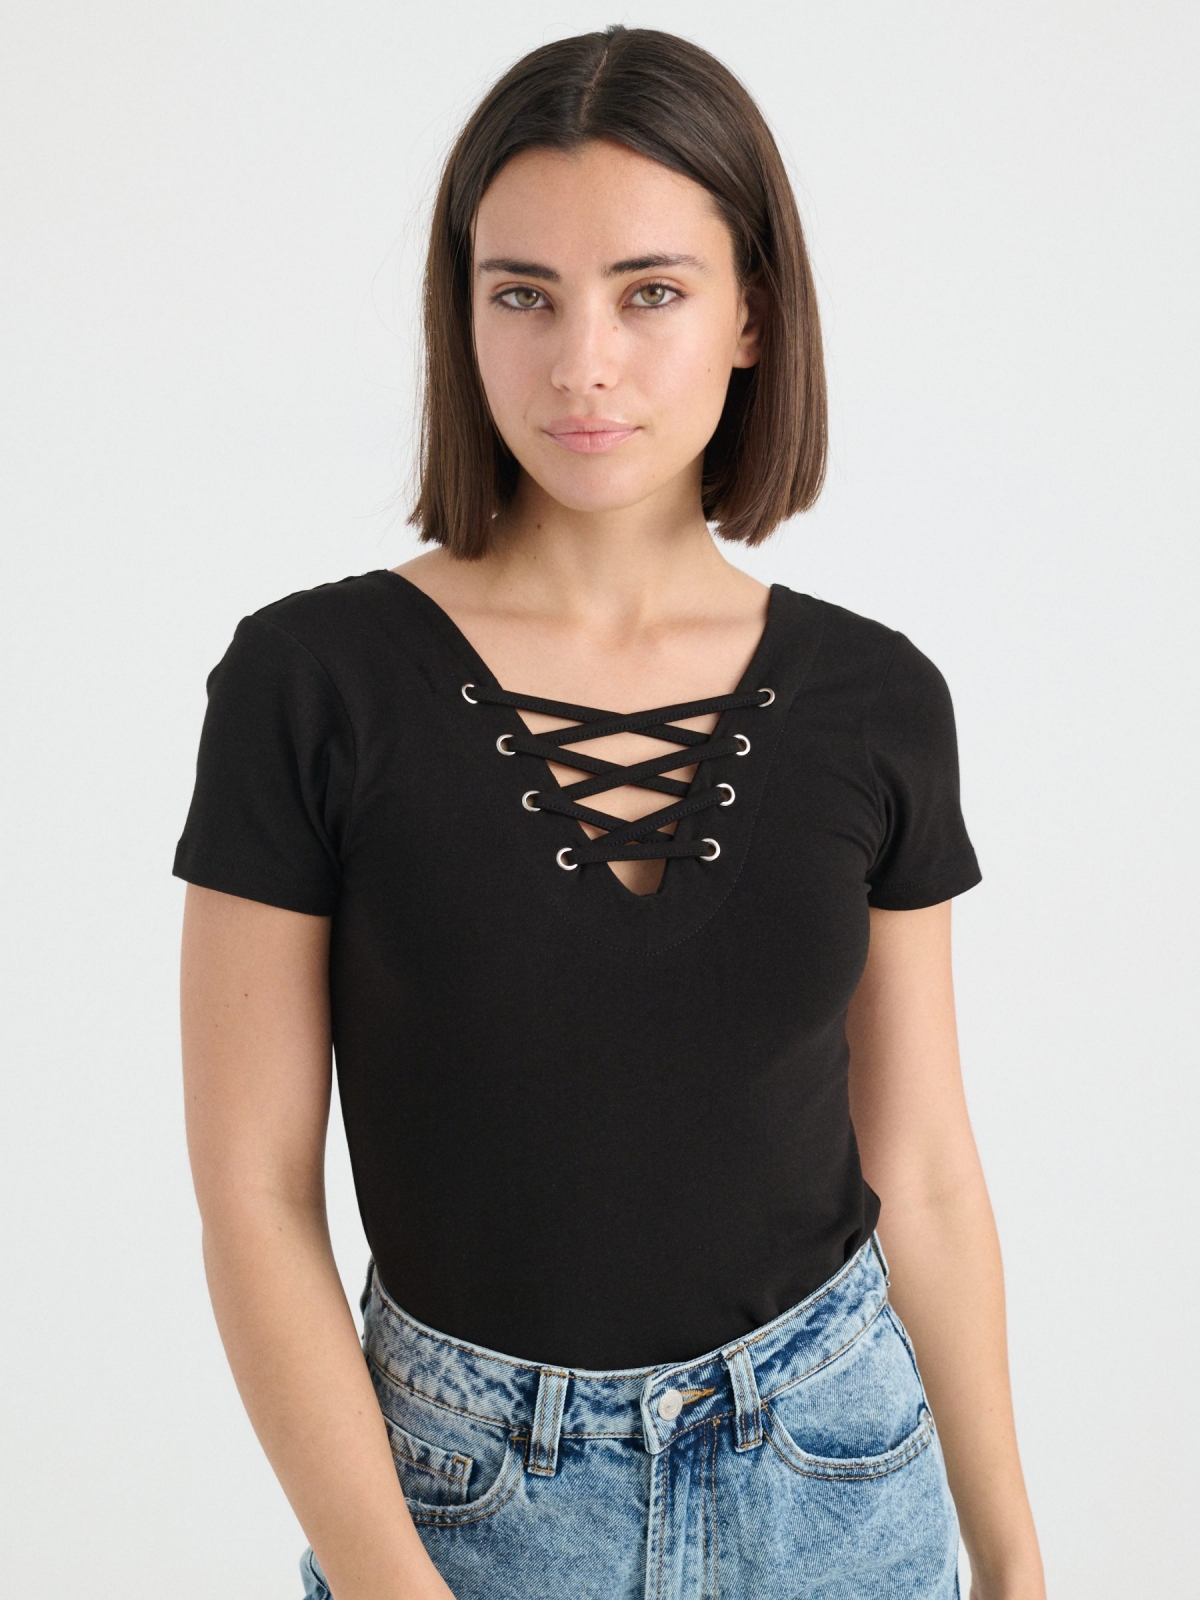 Lace up t-shirt black middle front view